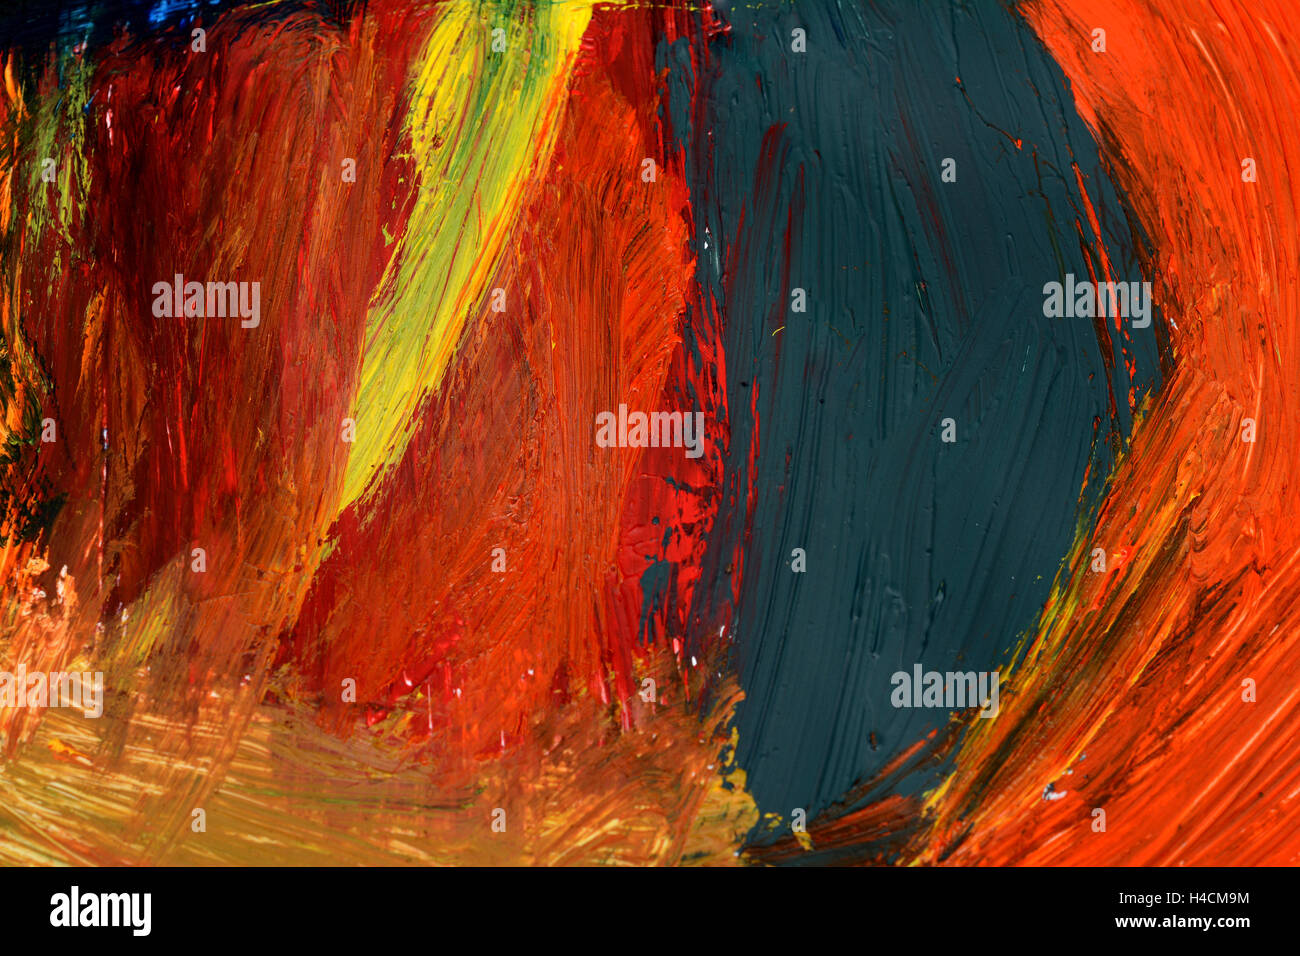 Colorful background image of bright acrylic colors closeup. Stock Photo